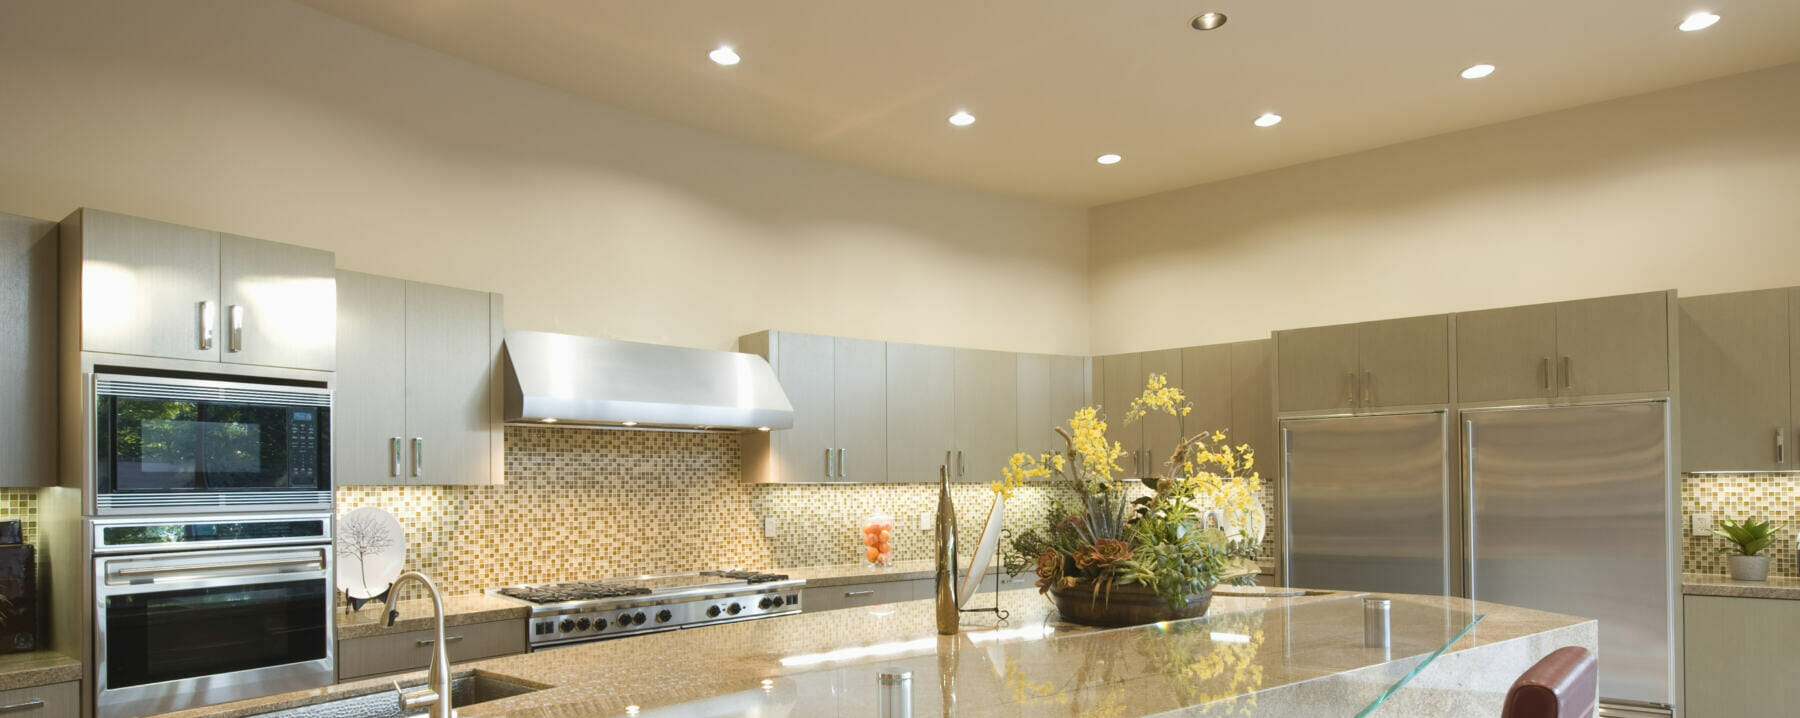 Redhawk Temecula Electronics can install affordable LED can lights, recessed track lighting, and LED lighting fixtures.